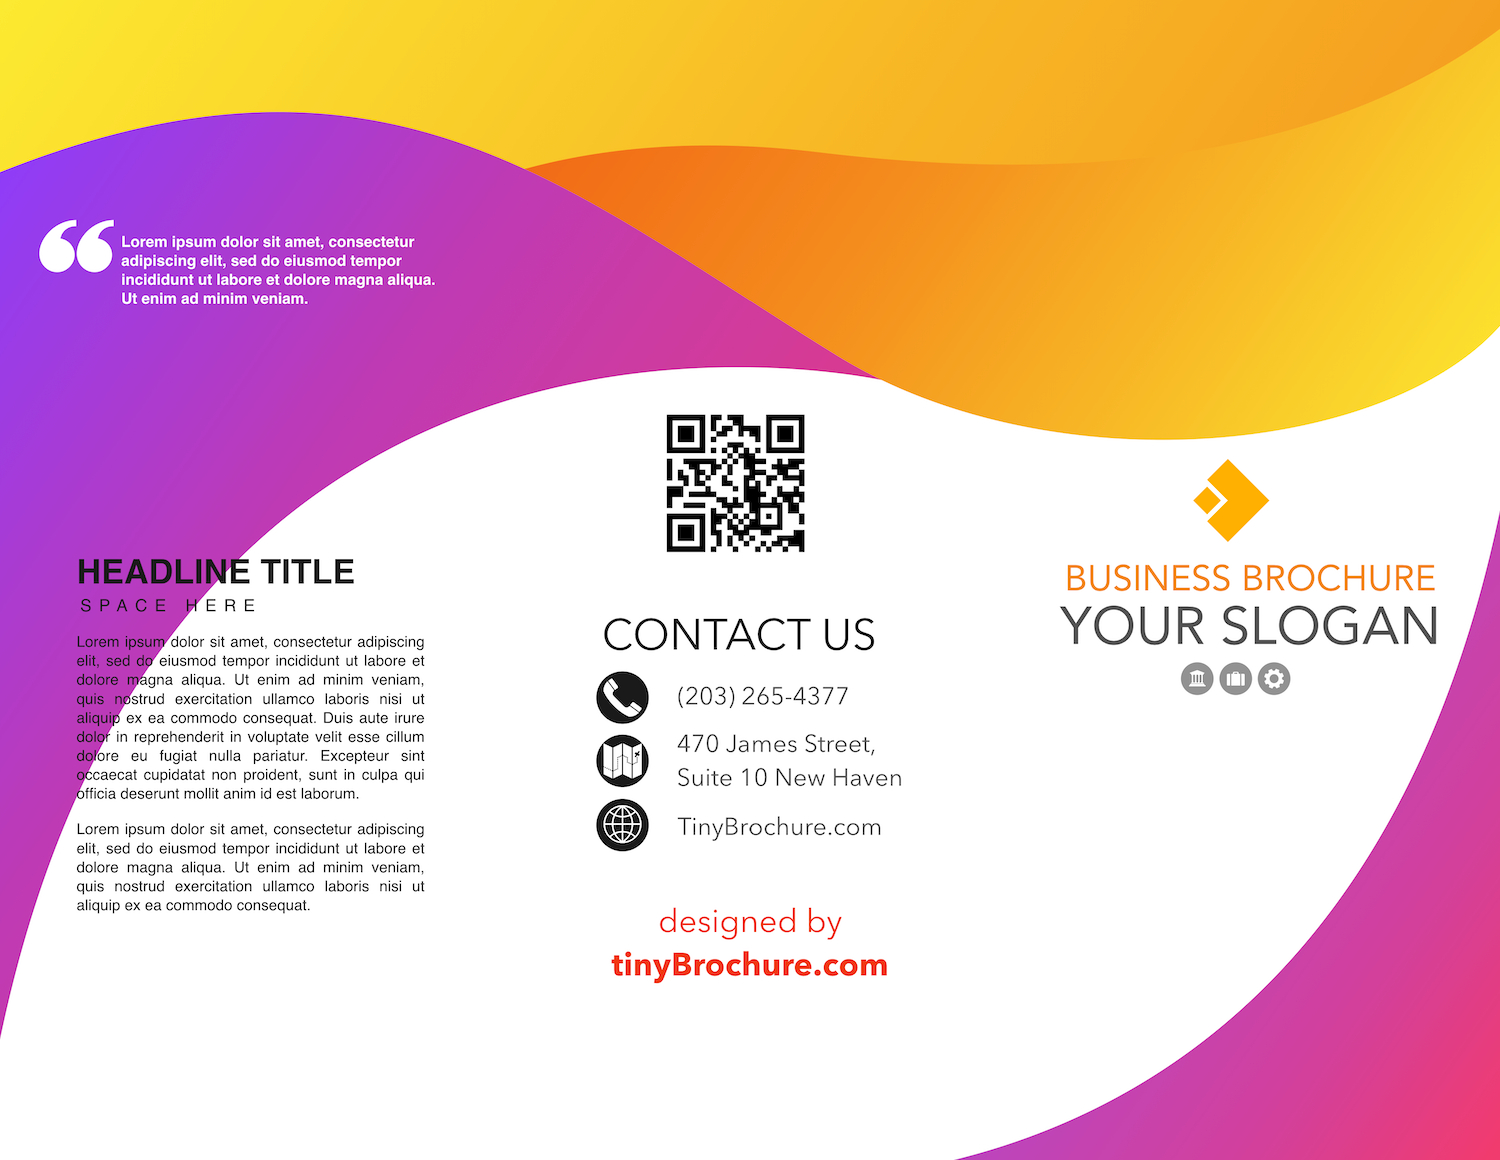 How To Make A Tri Fold Brochure In Google Docs Intended For Tri Fold Brochure Template Google Docs